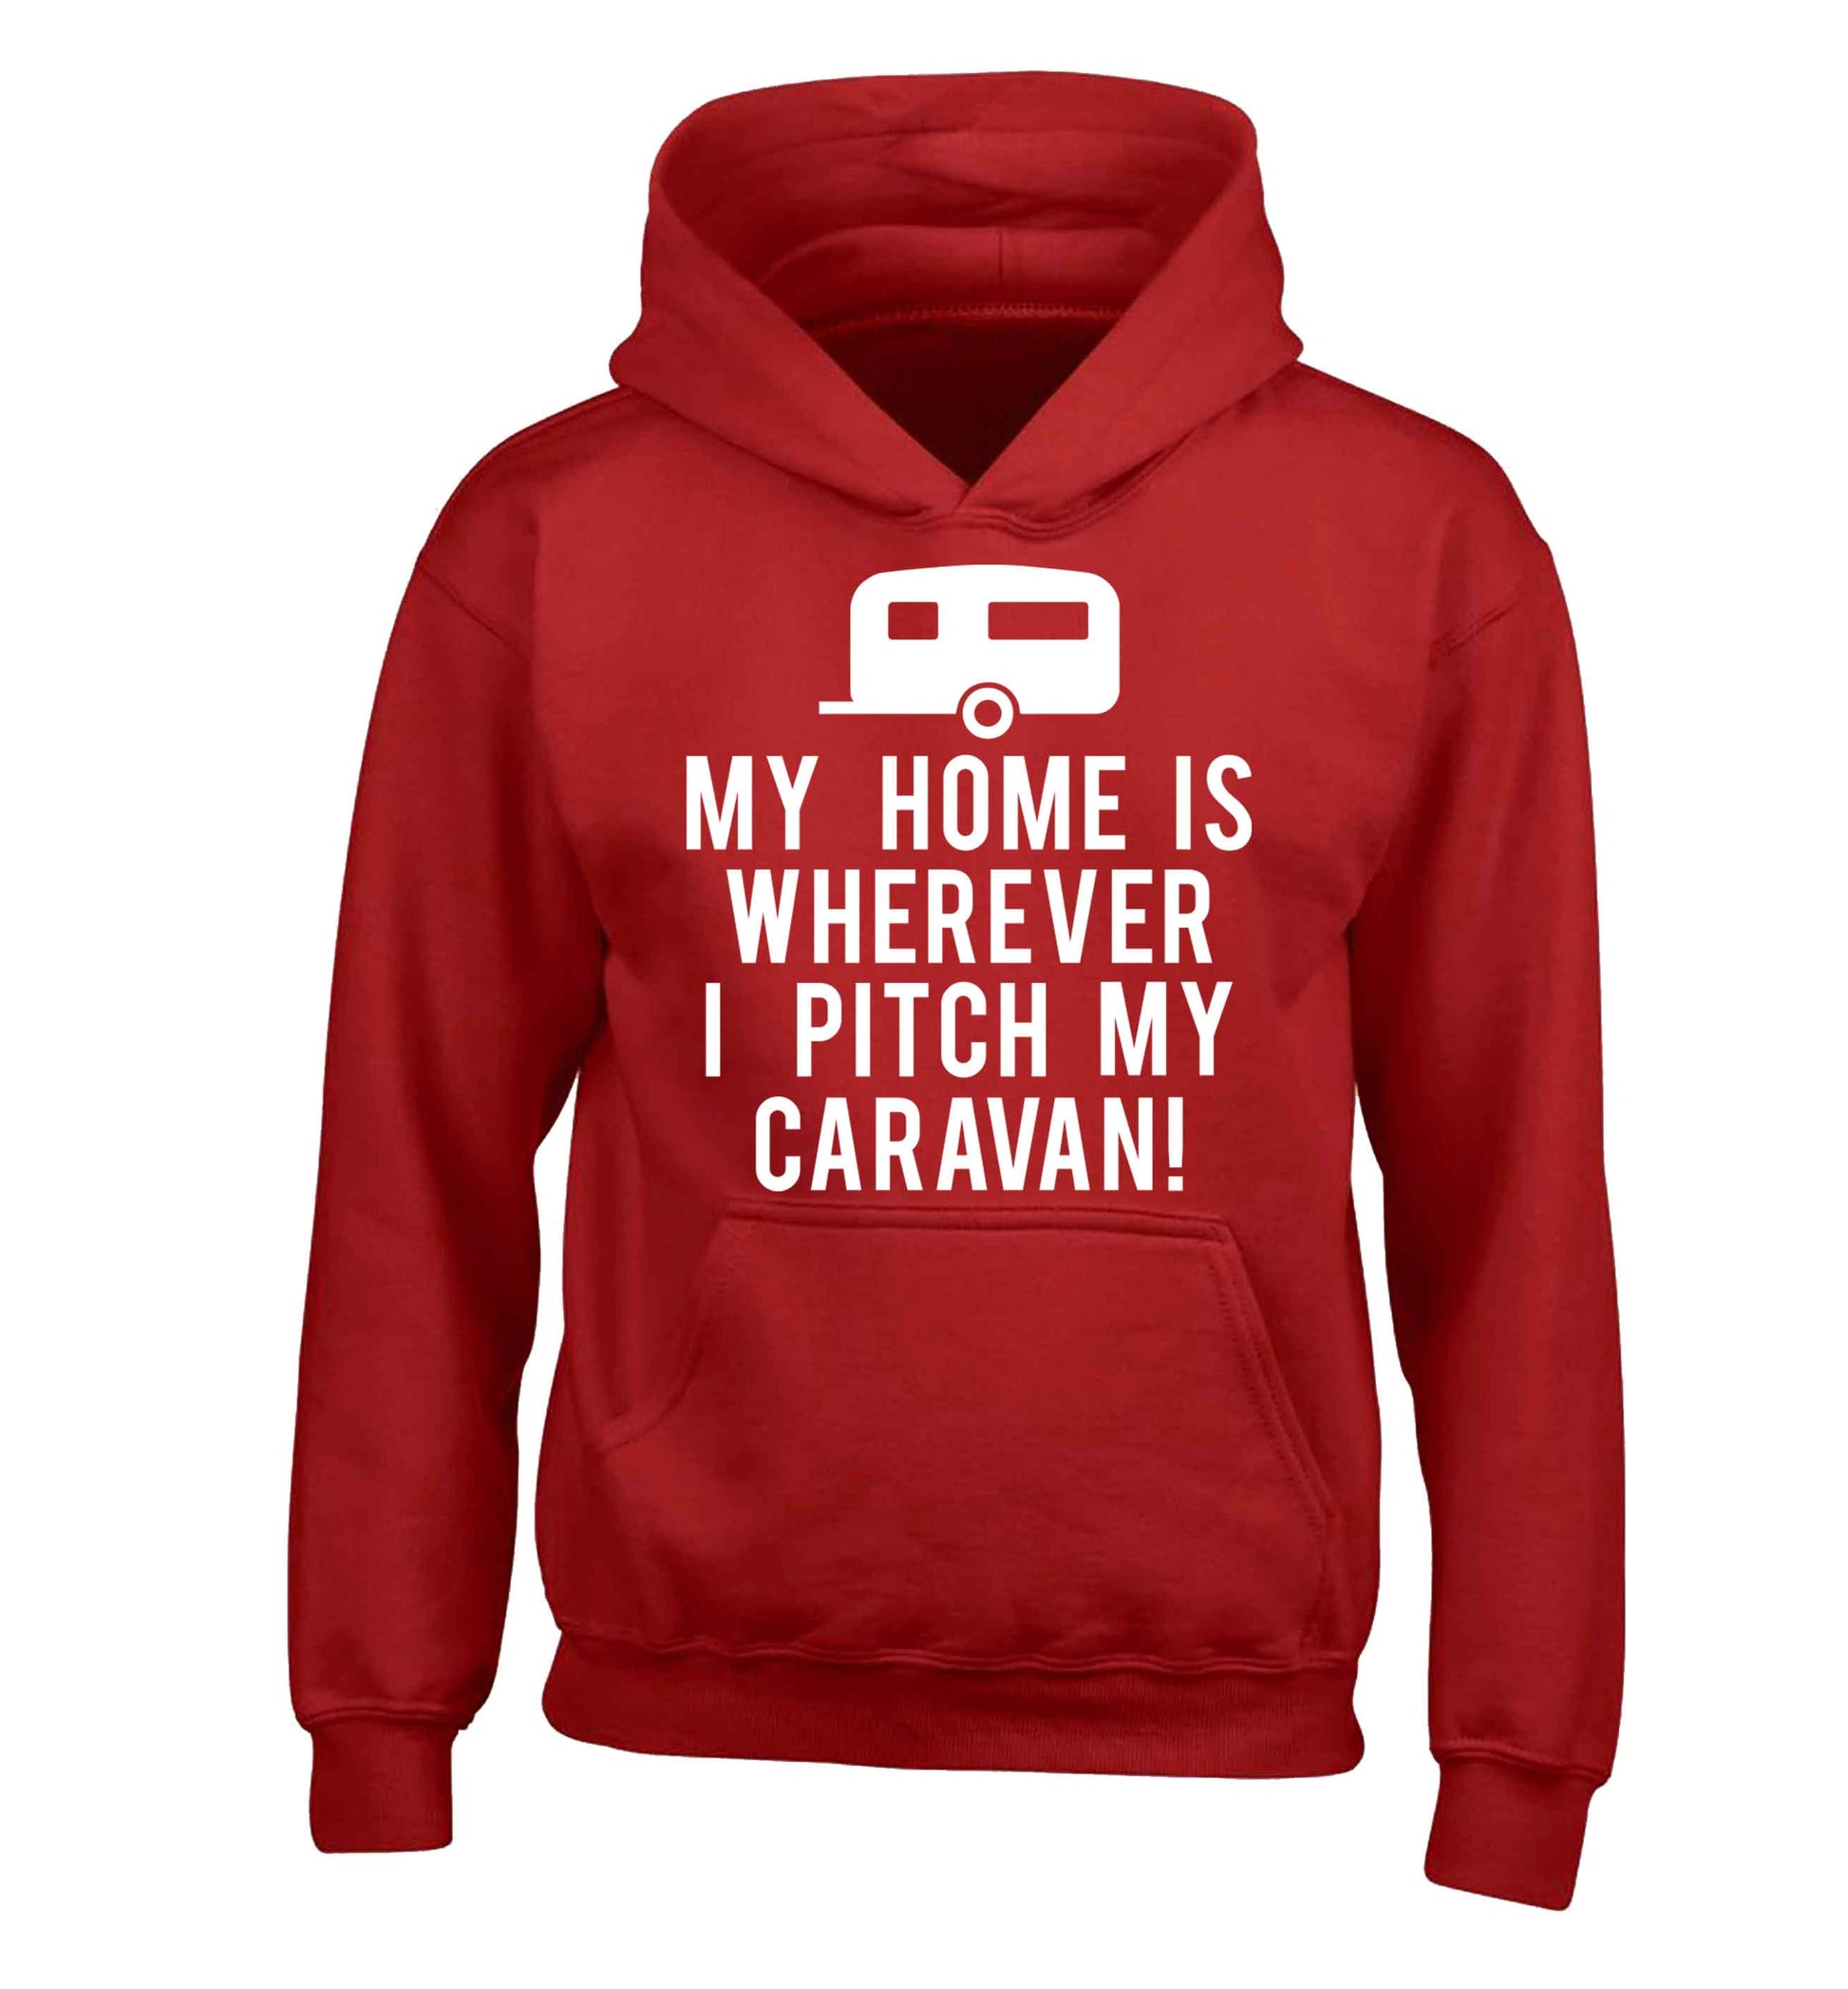 My home is wherever I pitch my caravan children's red hoodie 12-13 Years